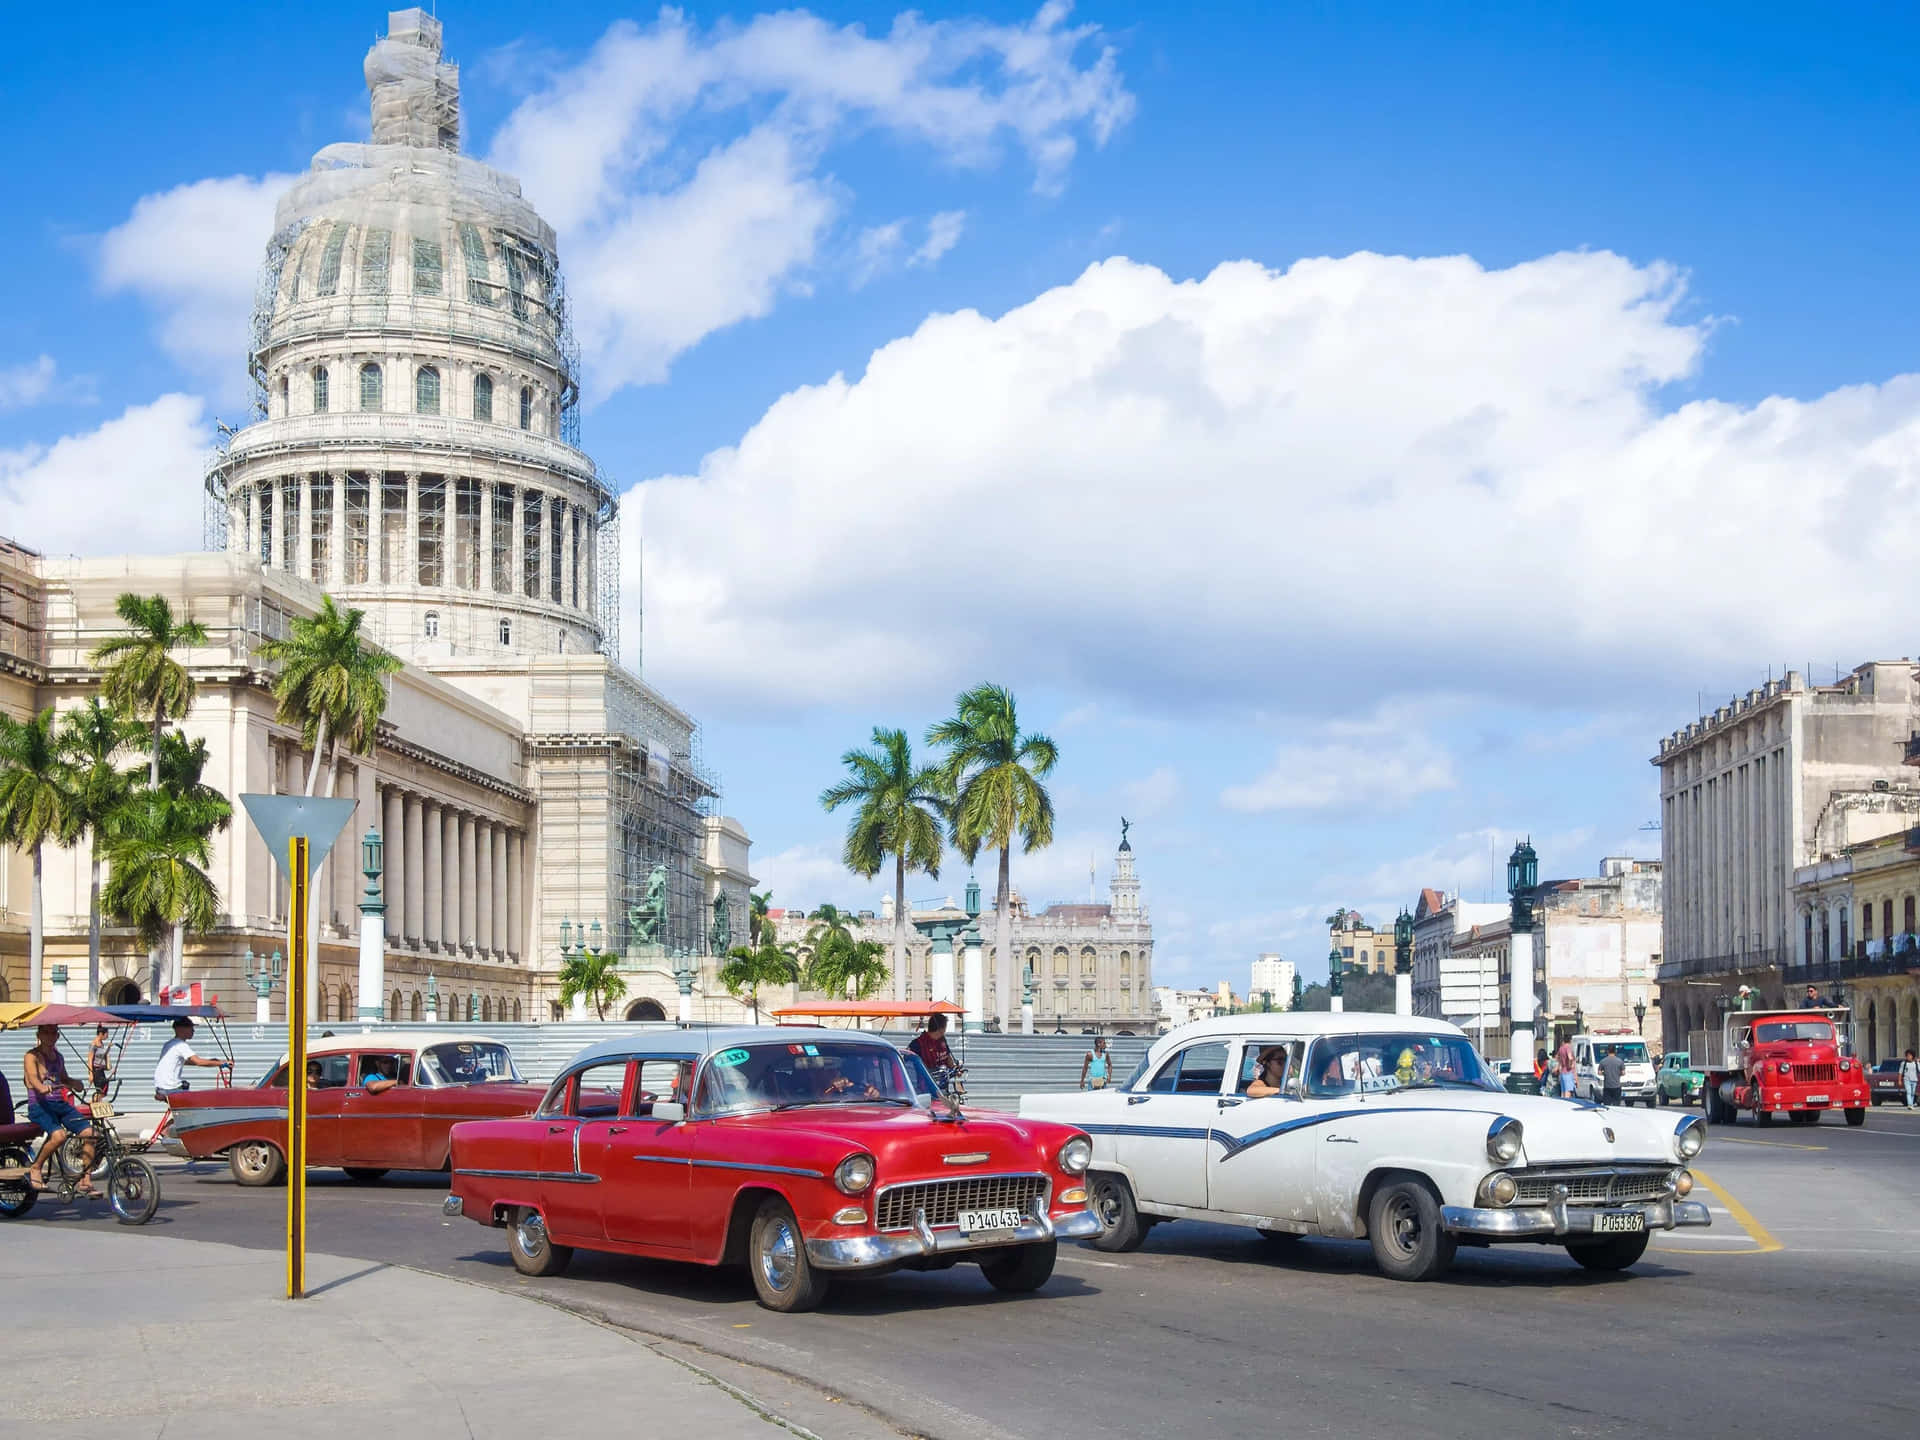 Get lost in the sun-soaked streets and vibrant culture of Cuba